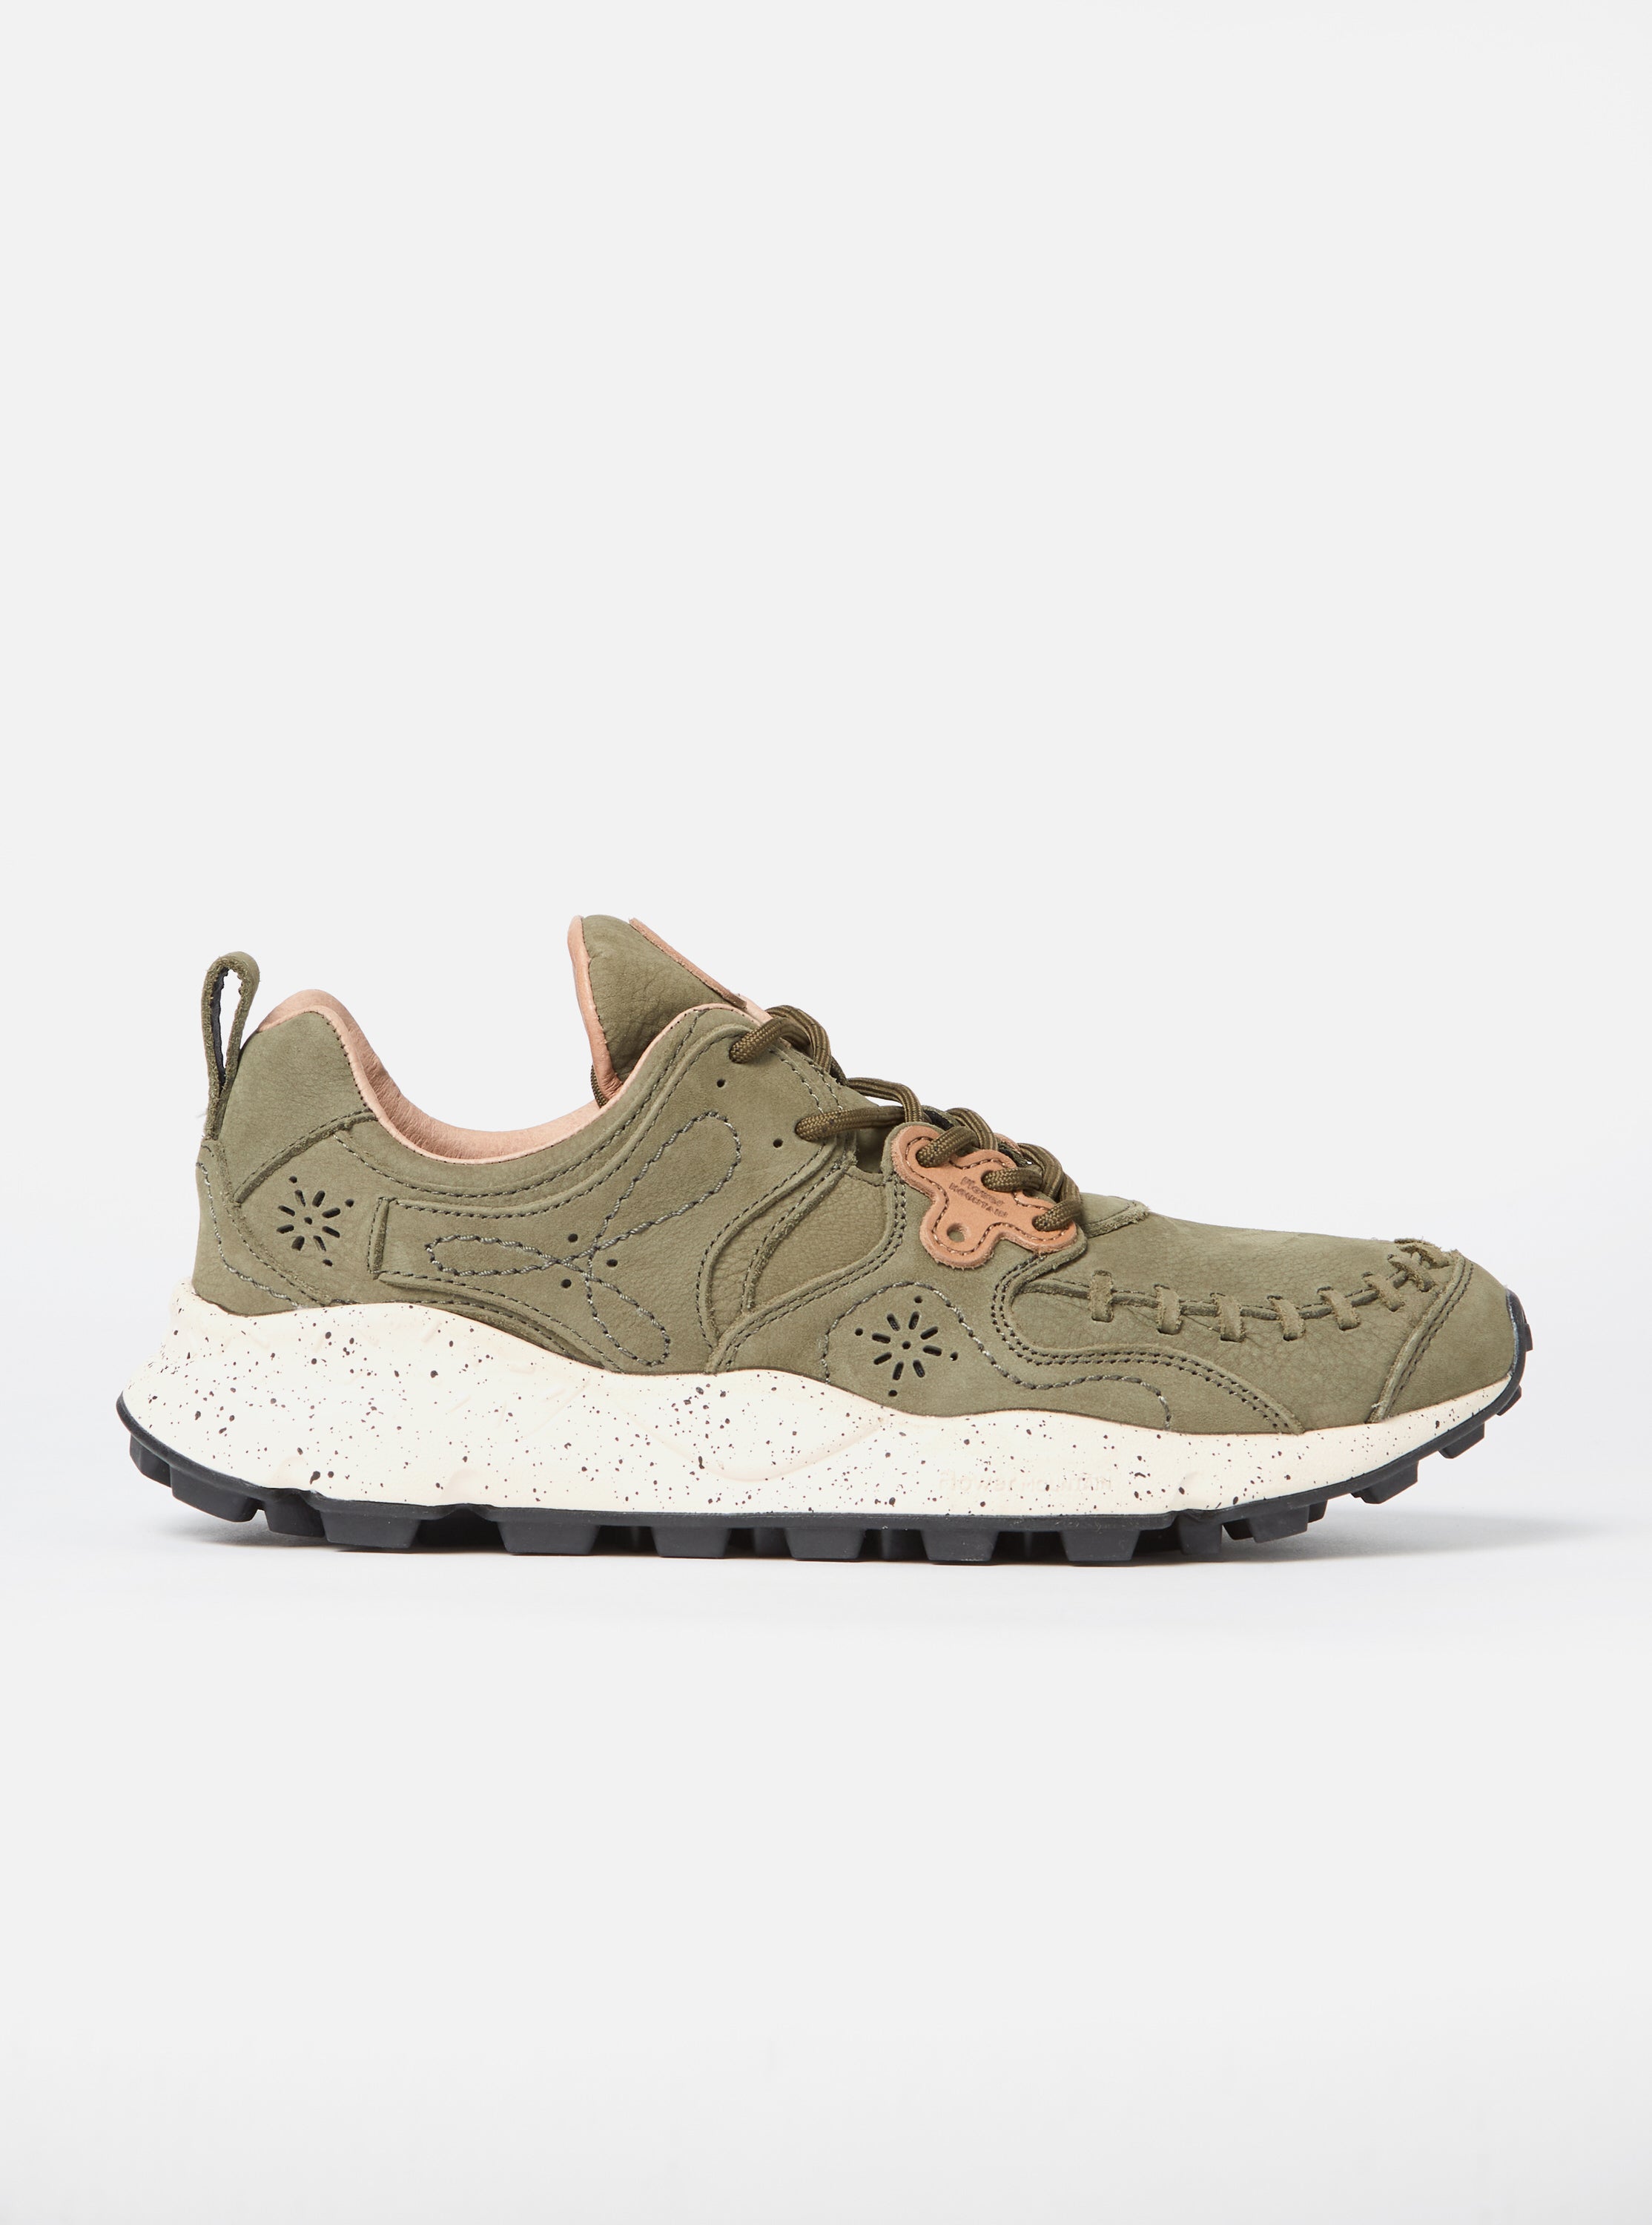 Flower Mountain Yamano Man In Military Olive Nubuck Leather